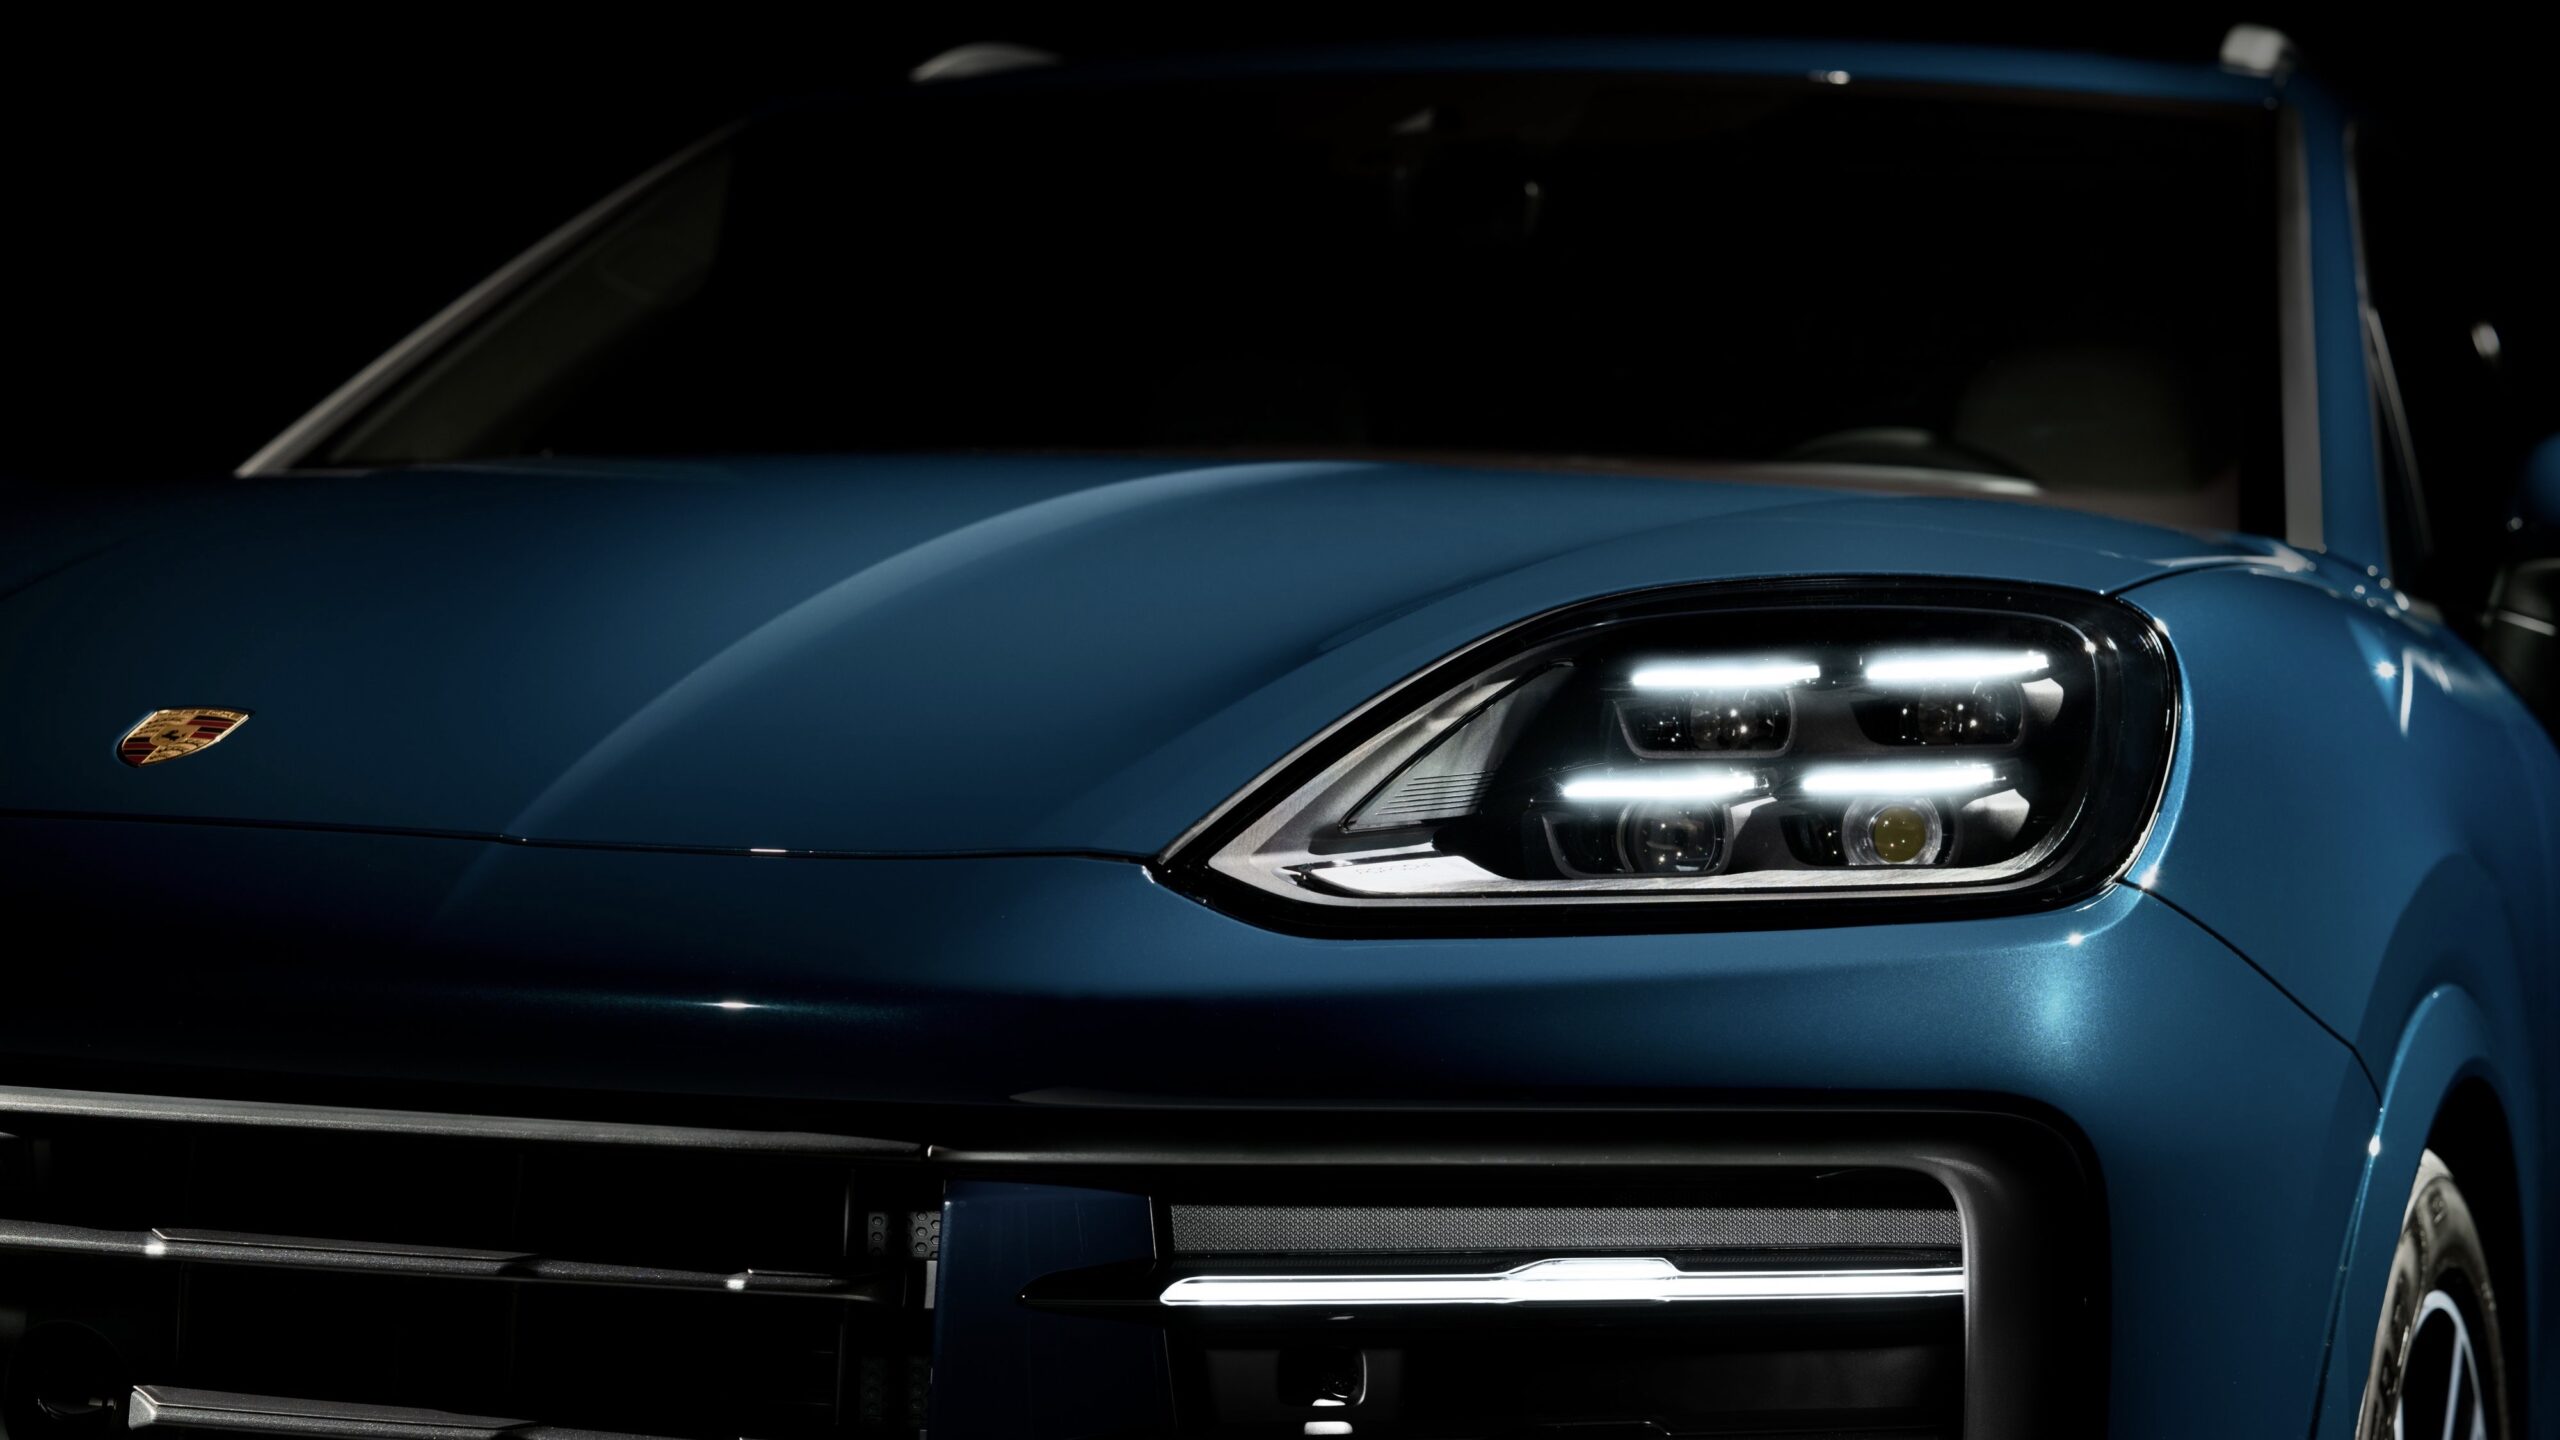 A teaser image of the upcoming Porsche Cayenne.